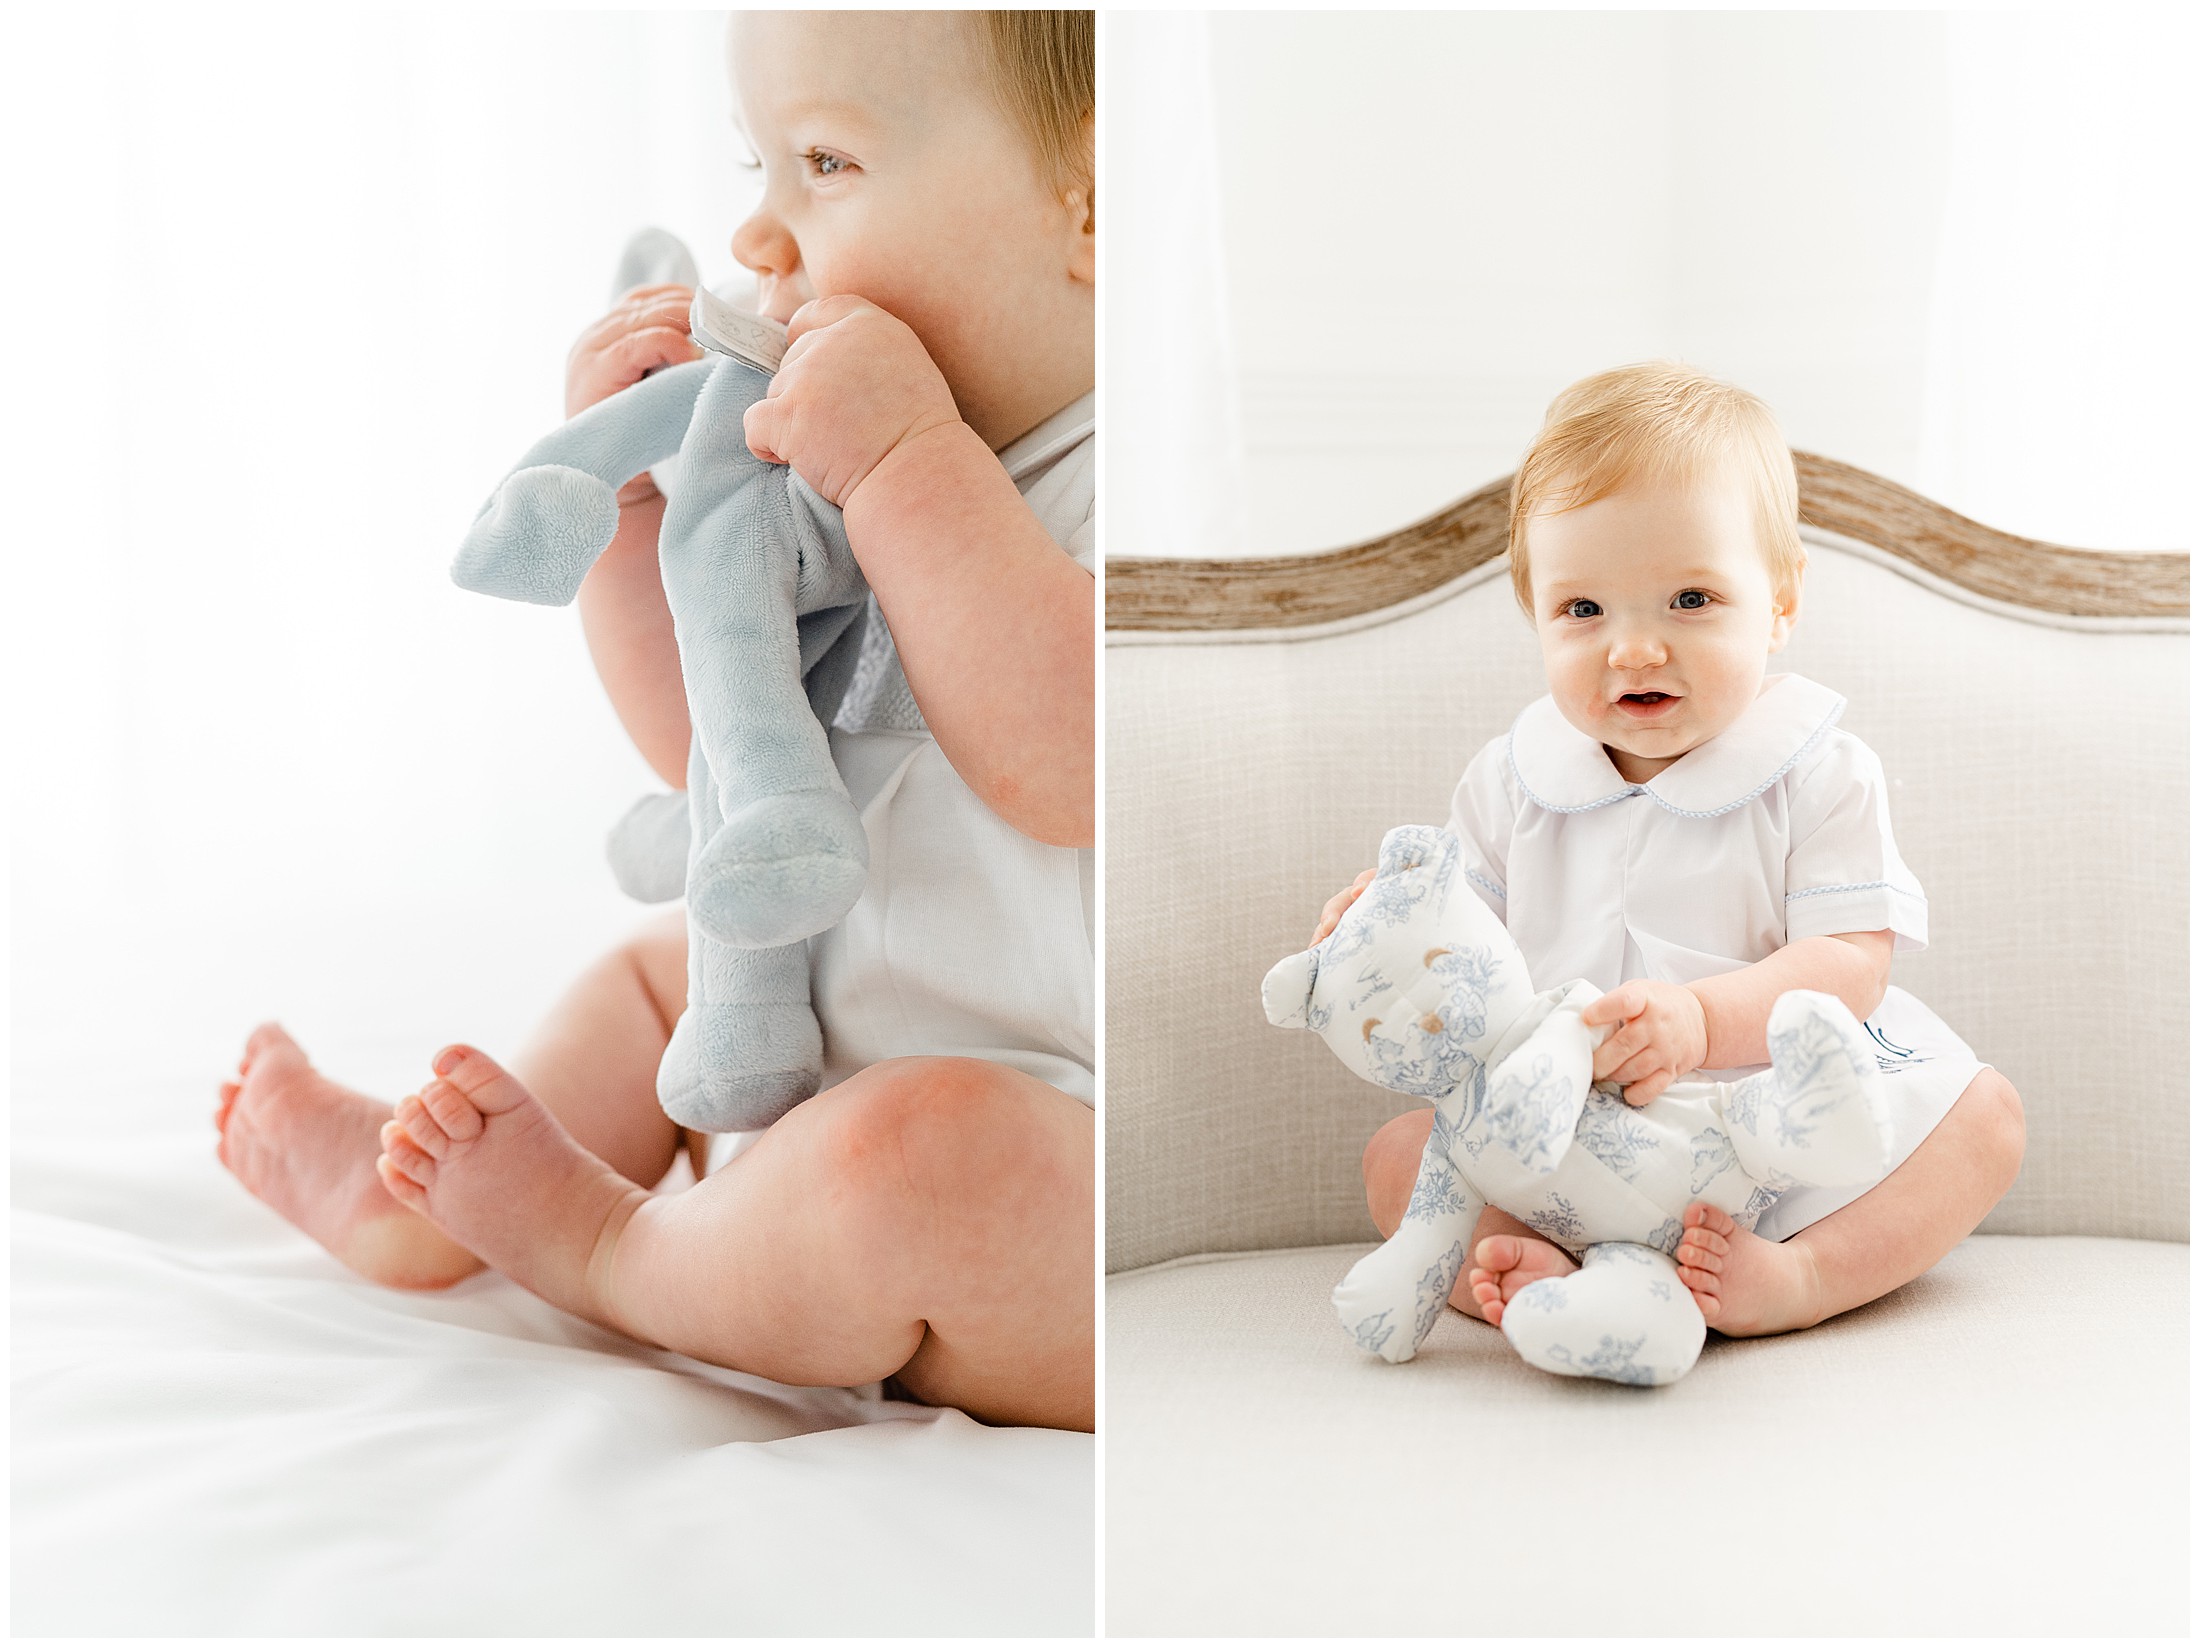 Two photos of a baby sitting and holding a small blue stuffed bear.